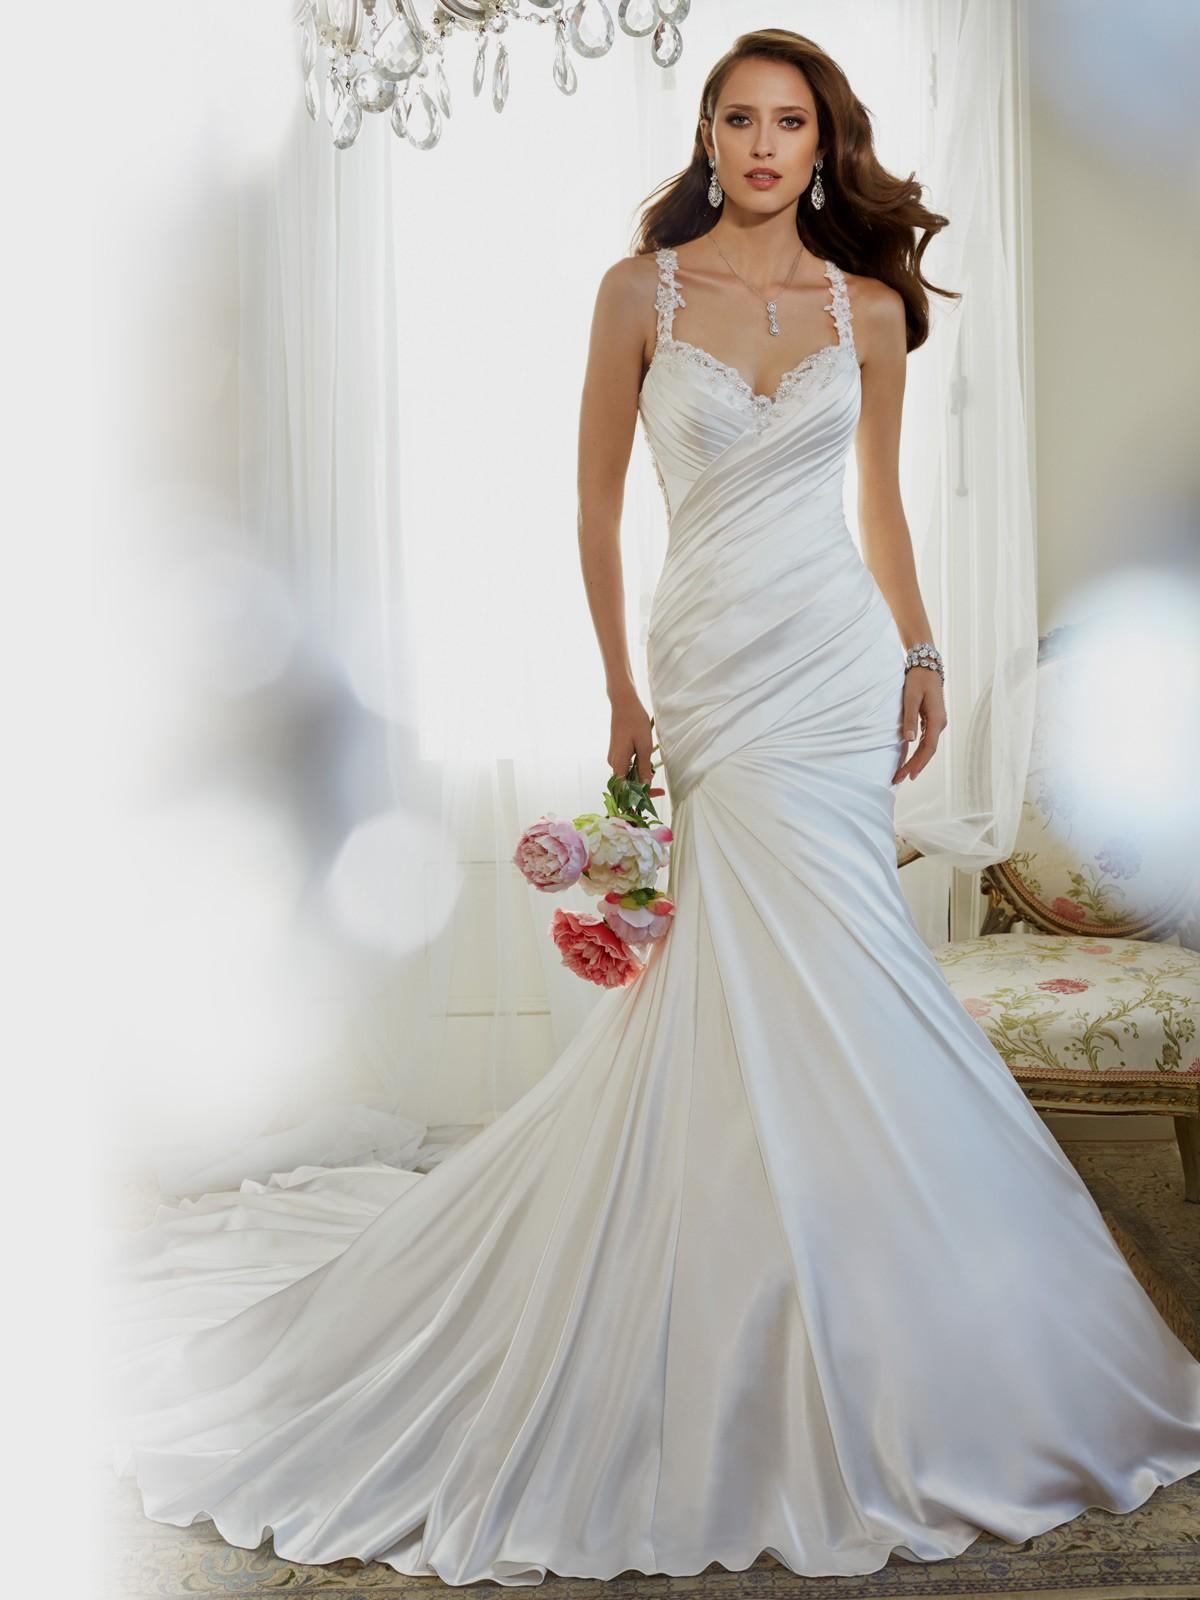 Wedding dresses fit and flare